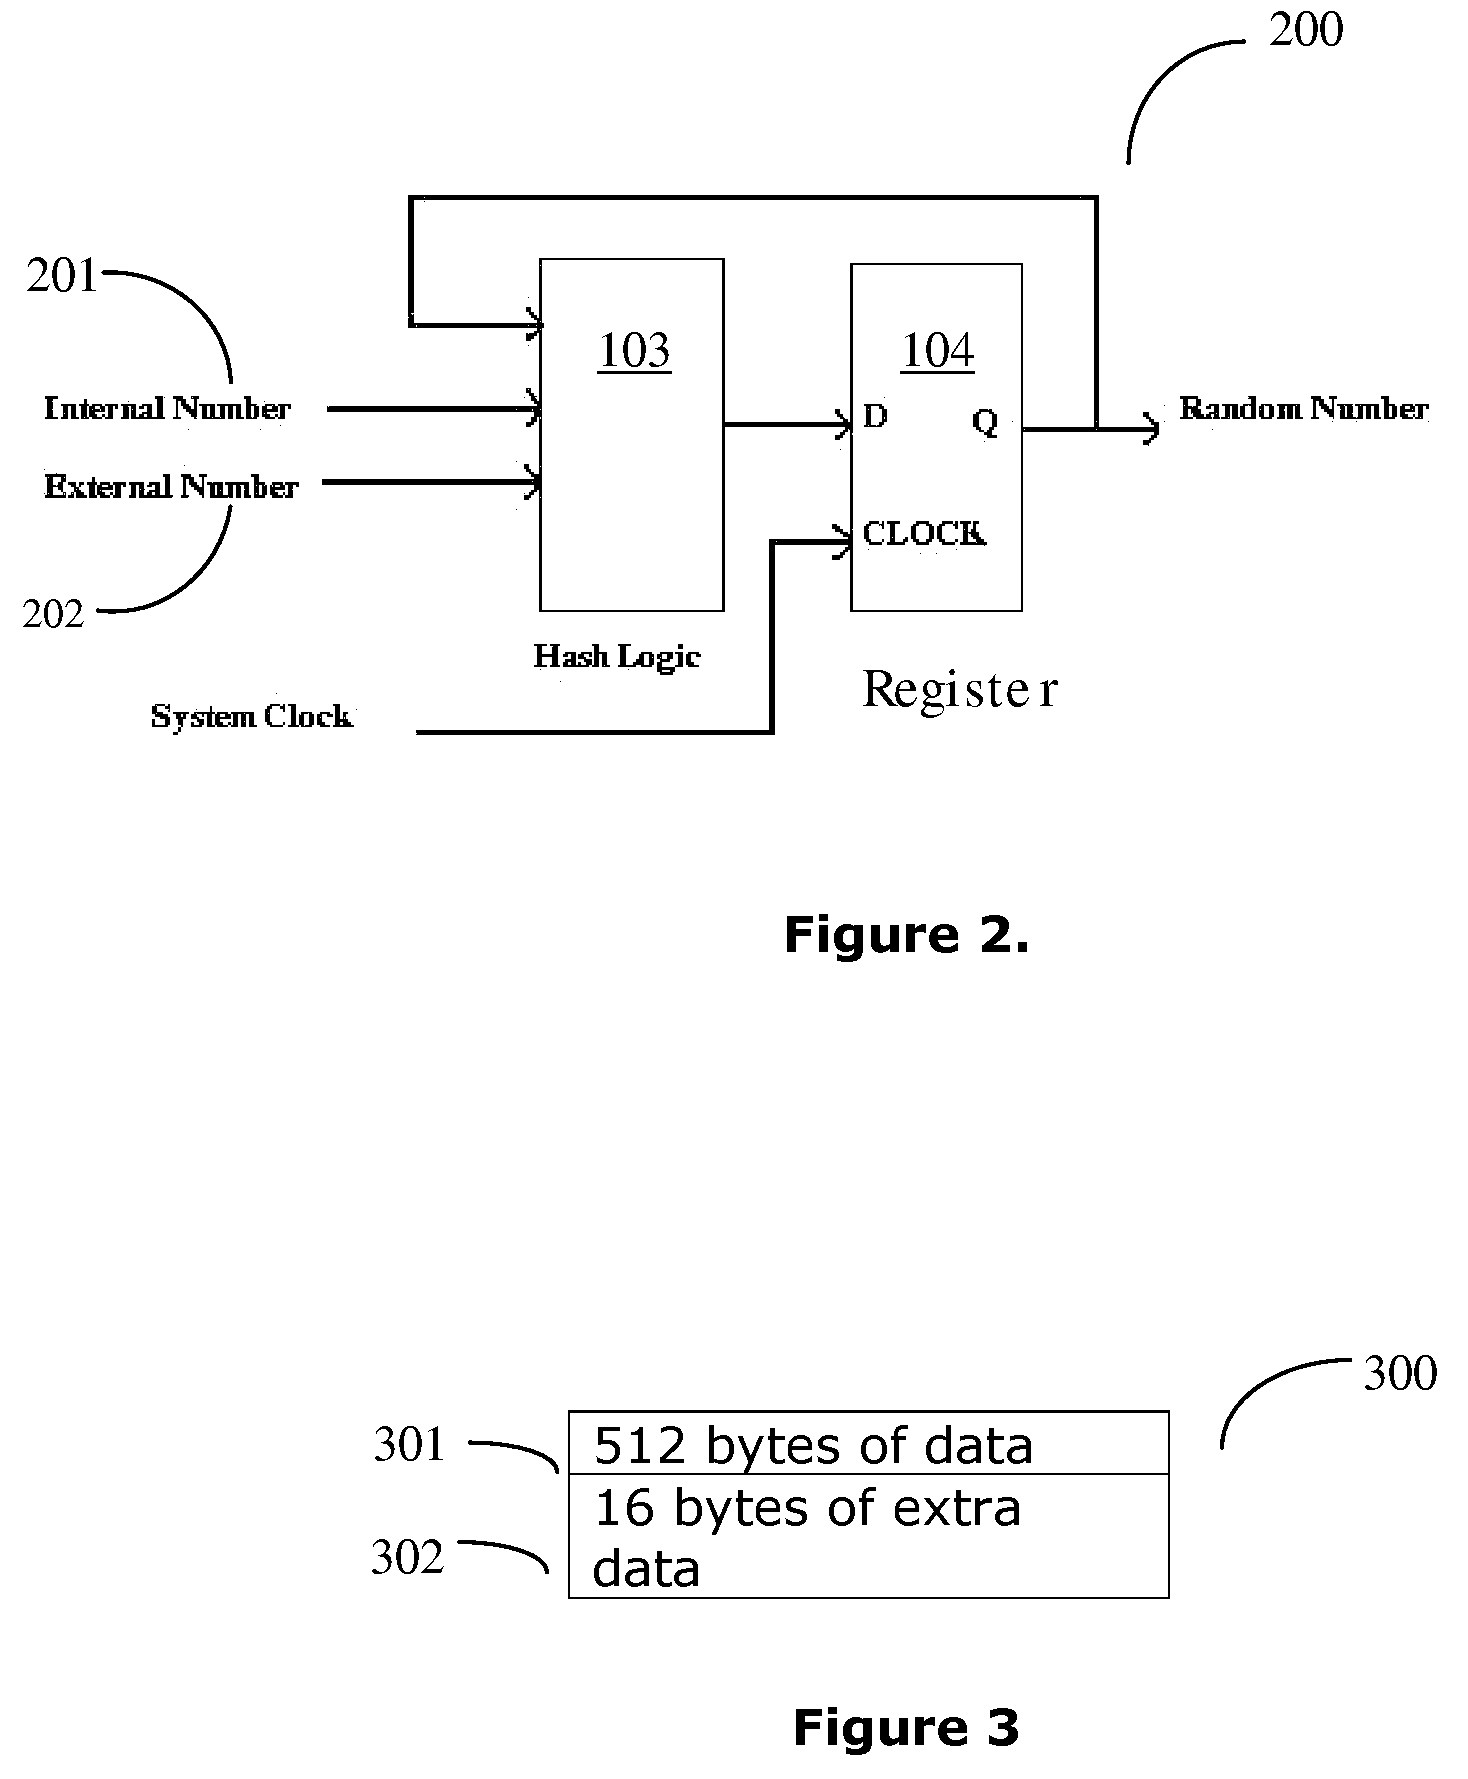 Method and system to provide security implementation for storage devices